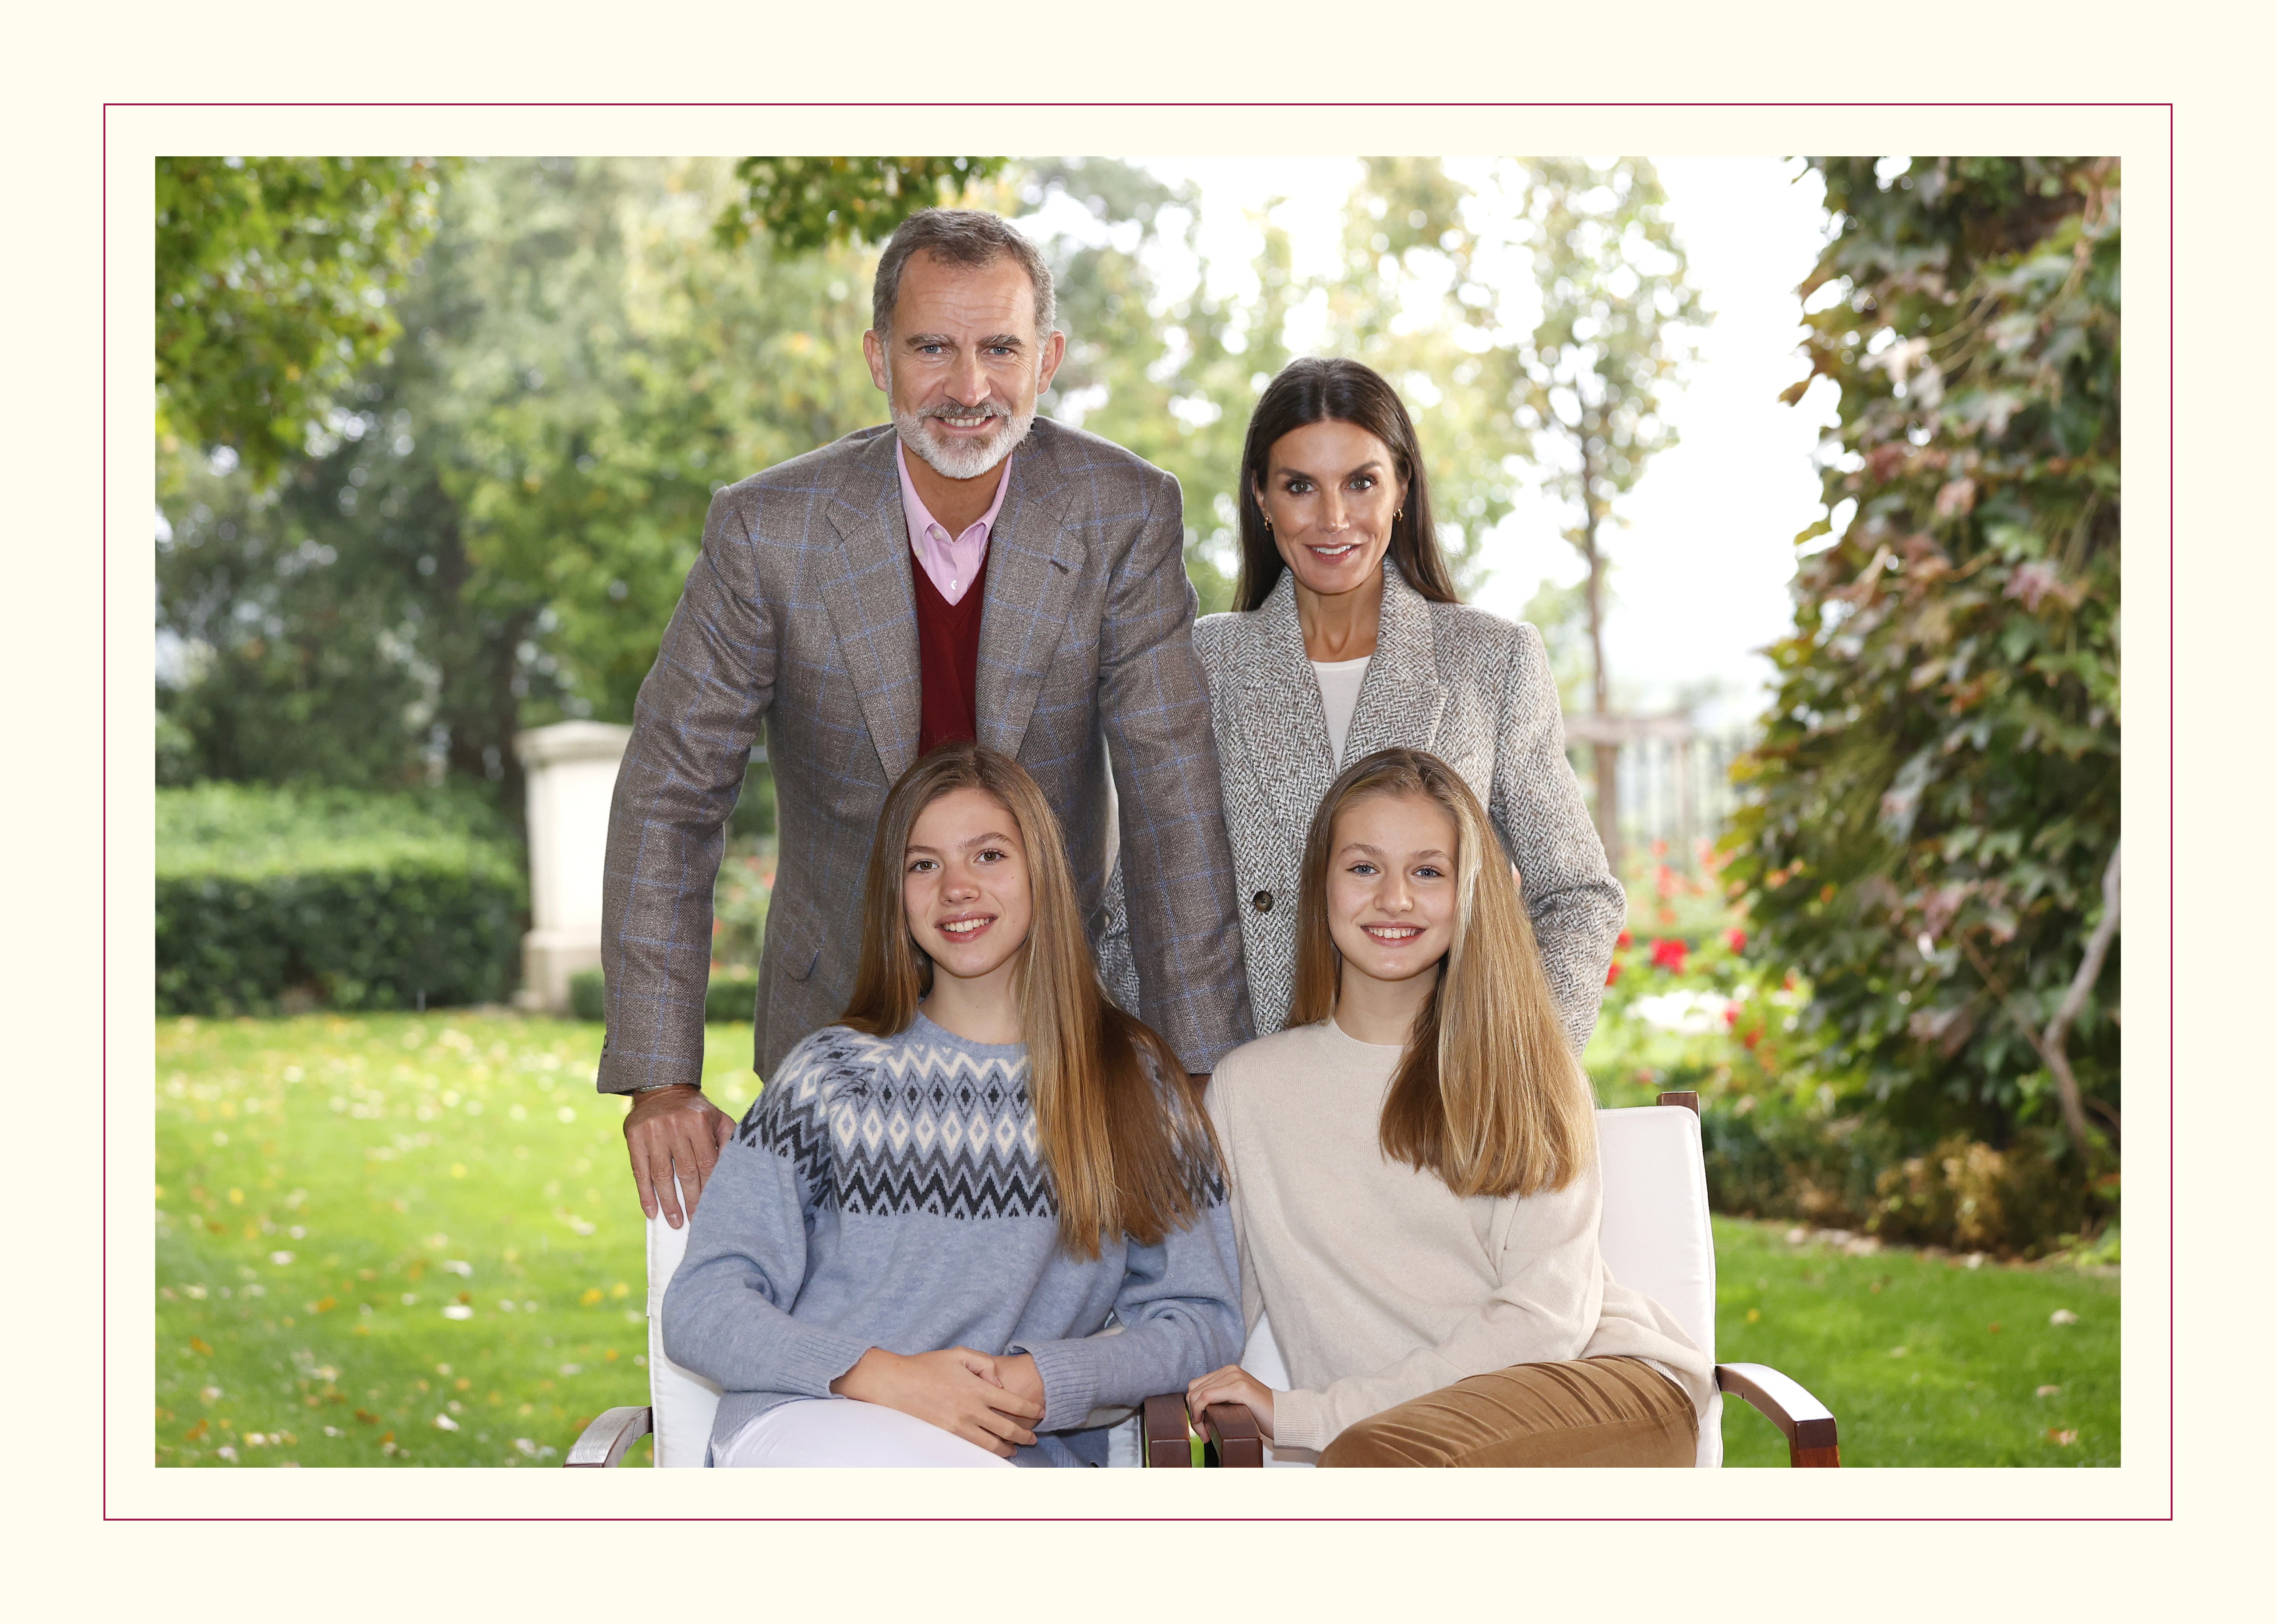 The Royal Christmas Card featuring a photograph of King Felipe VI of Spain with Queen Letizia of Spain and their children Crown Princess Leonor of Spain and Princess Sofia of Spain on December 16, 2021 in Madrid, Spain. | Source: Getty Images